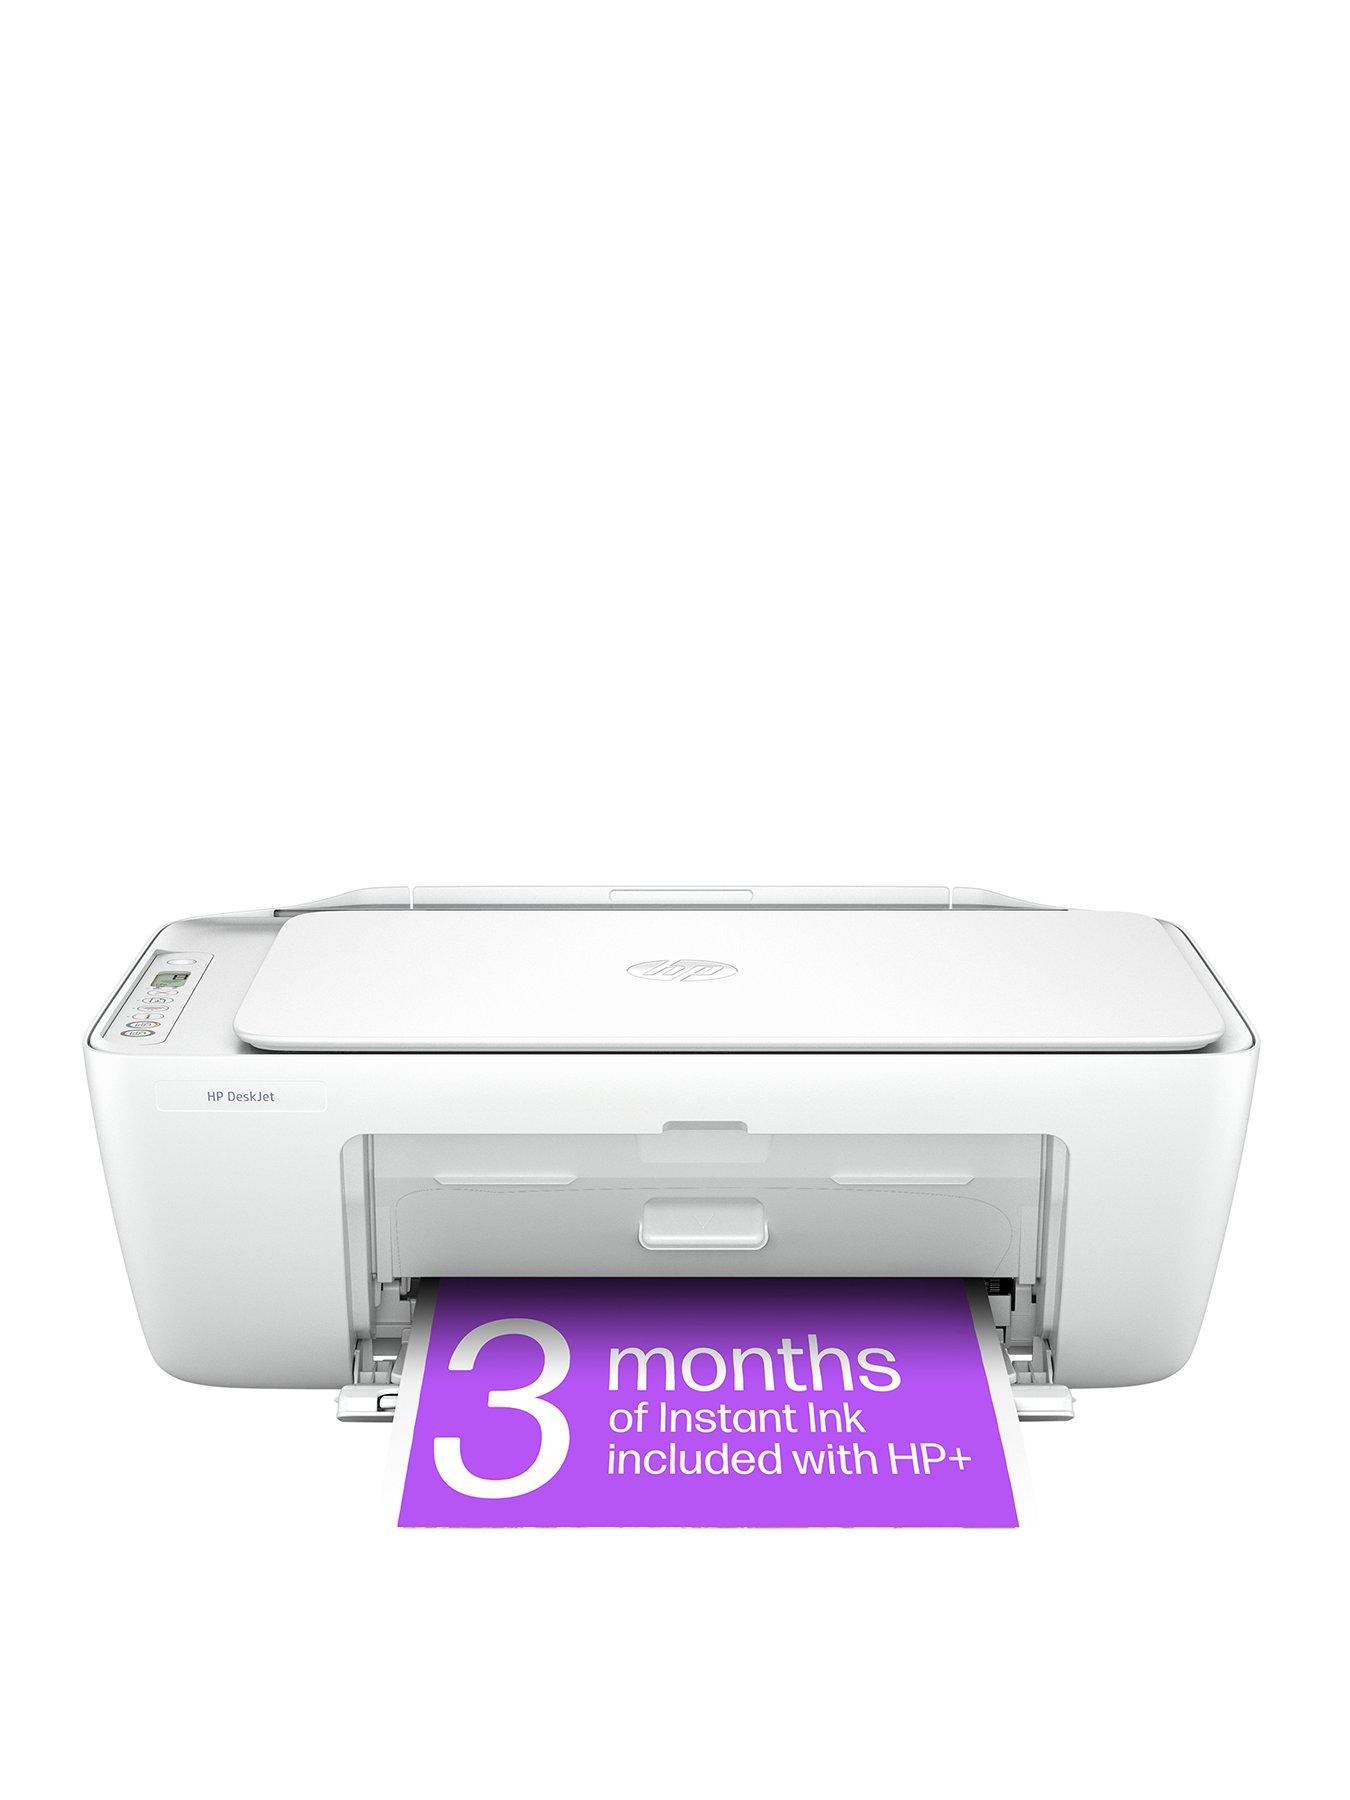 HP Deskjet 3760 Printer  Review with a Beer 